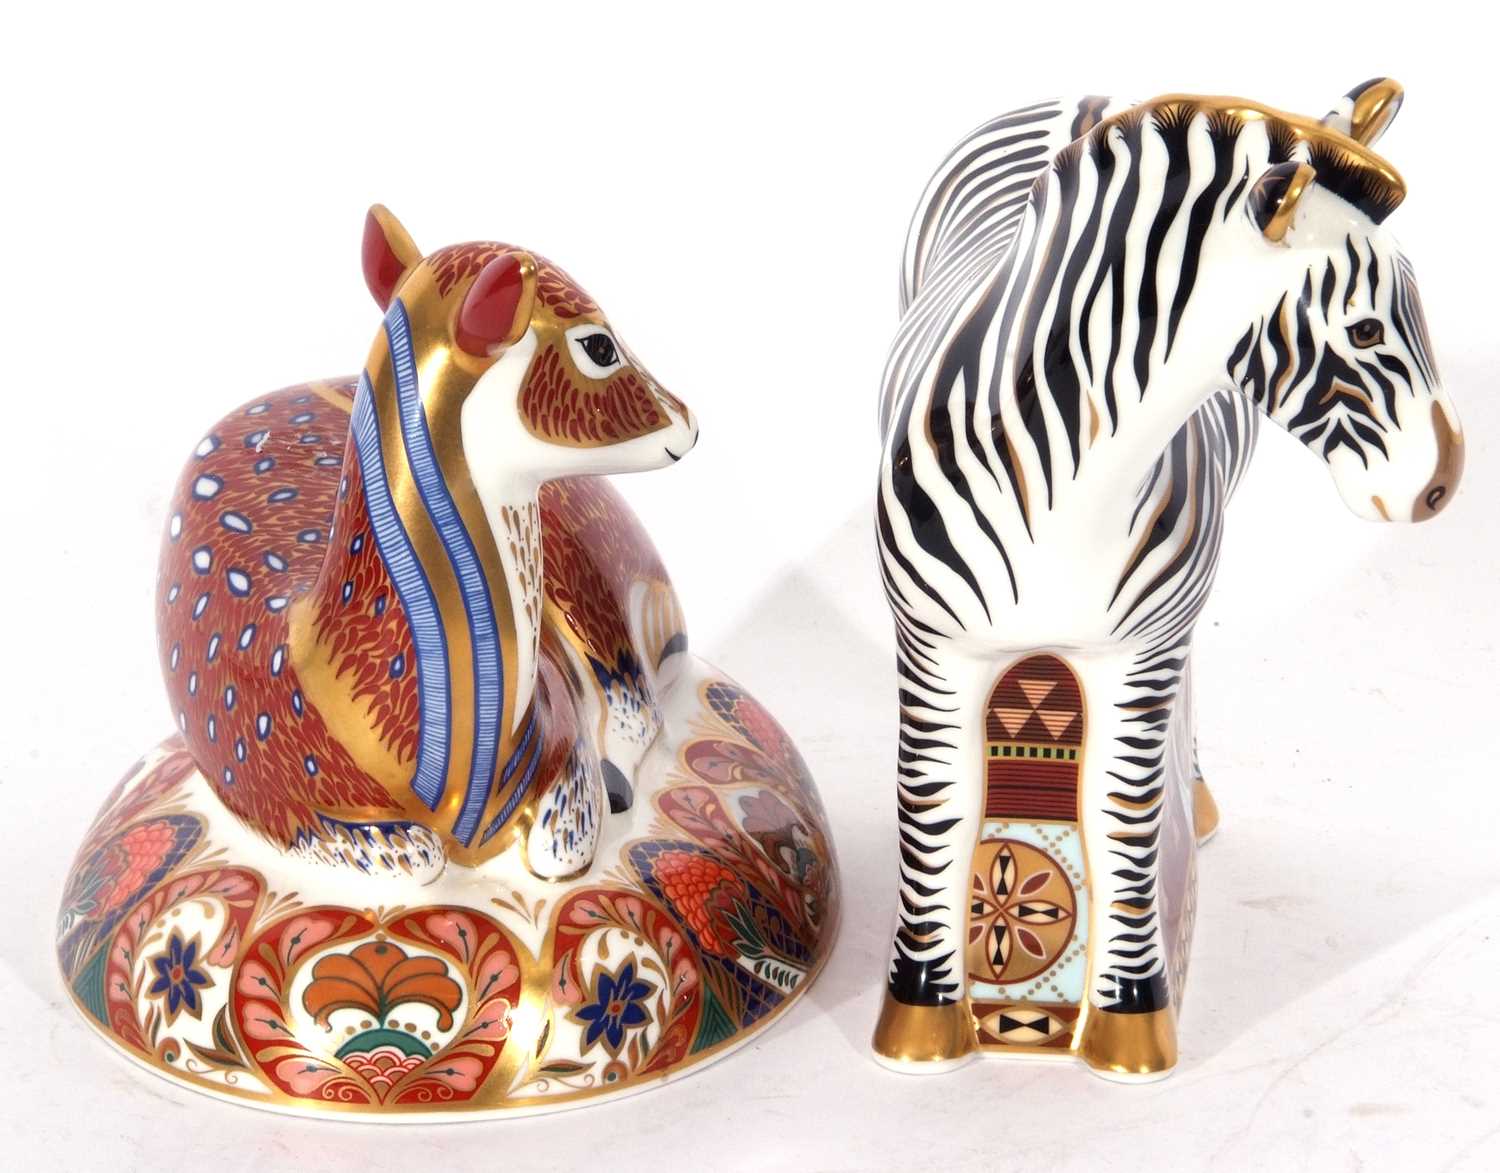 Royal crown derby model of a deer and a zebra (silver stopper) (2)Condition report: Good condition - Image 4 of 6